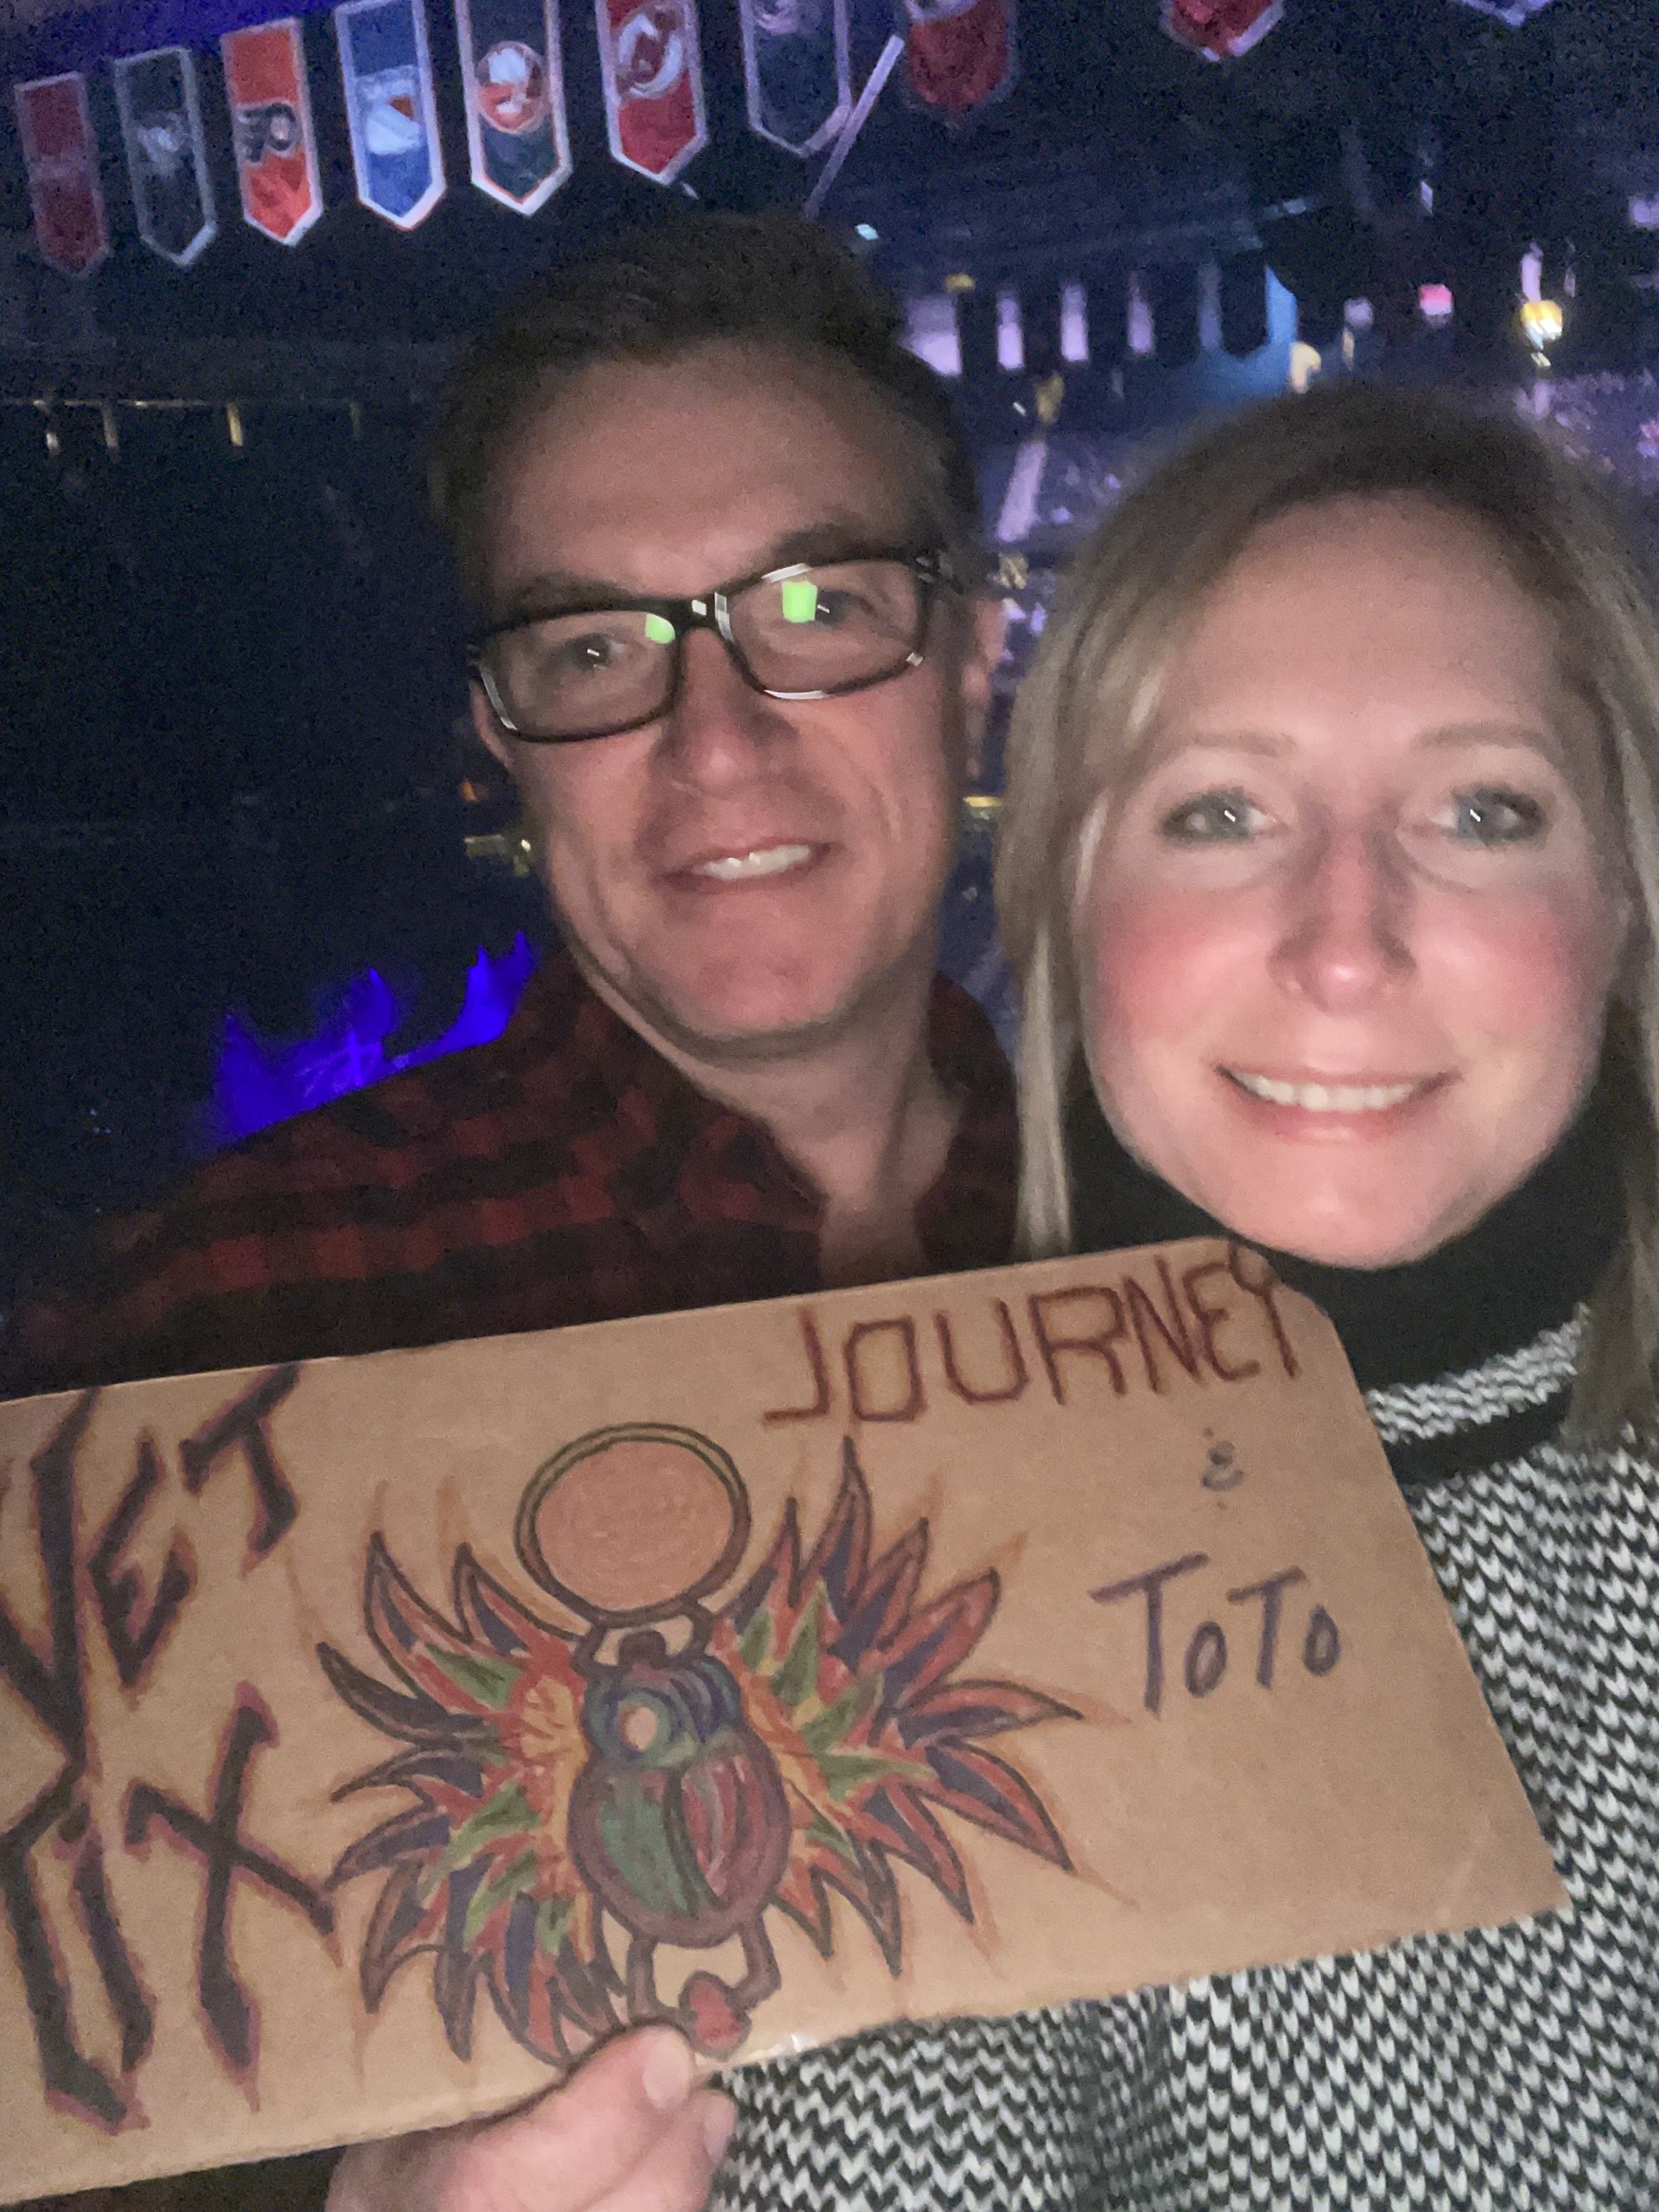 Journey: Freedom Tour 2022 With Very Special Guest Toto